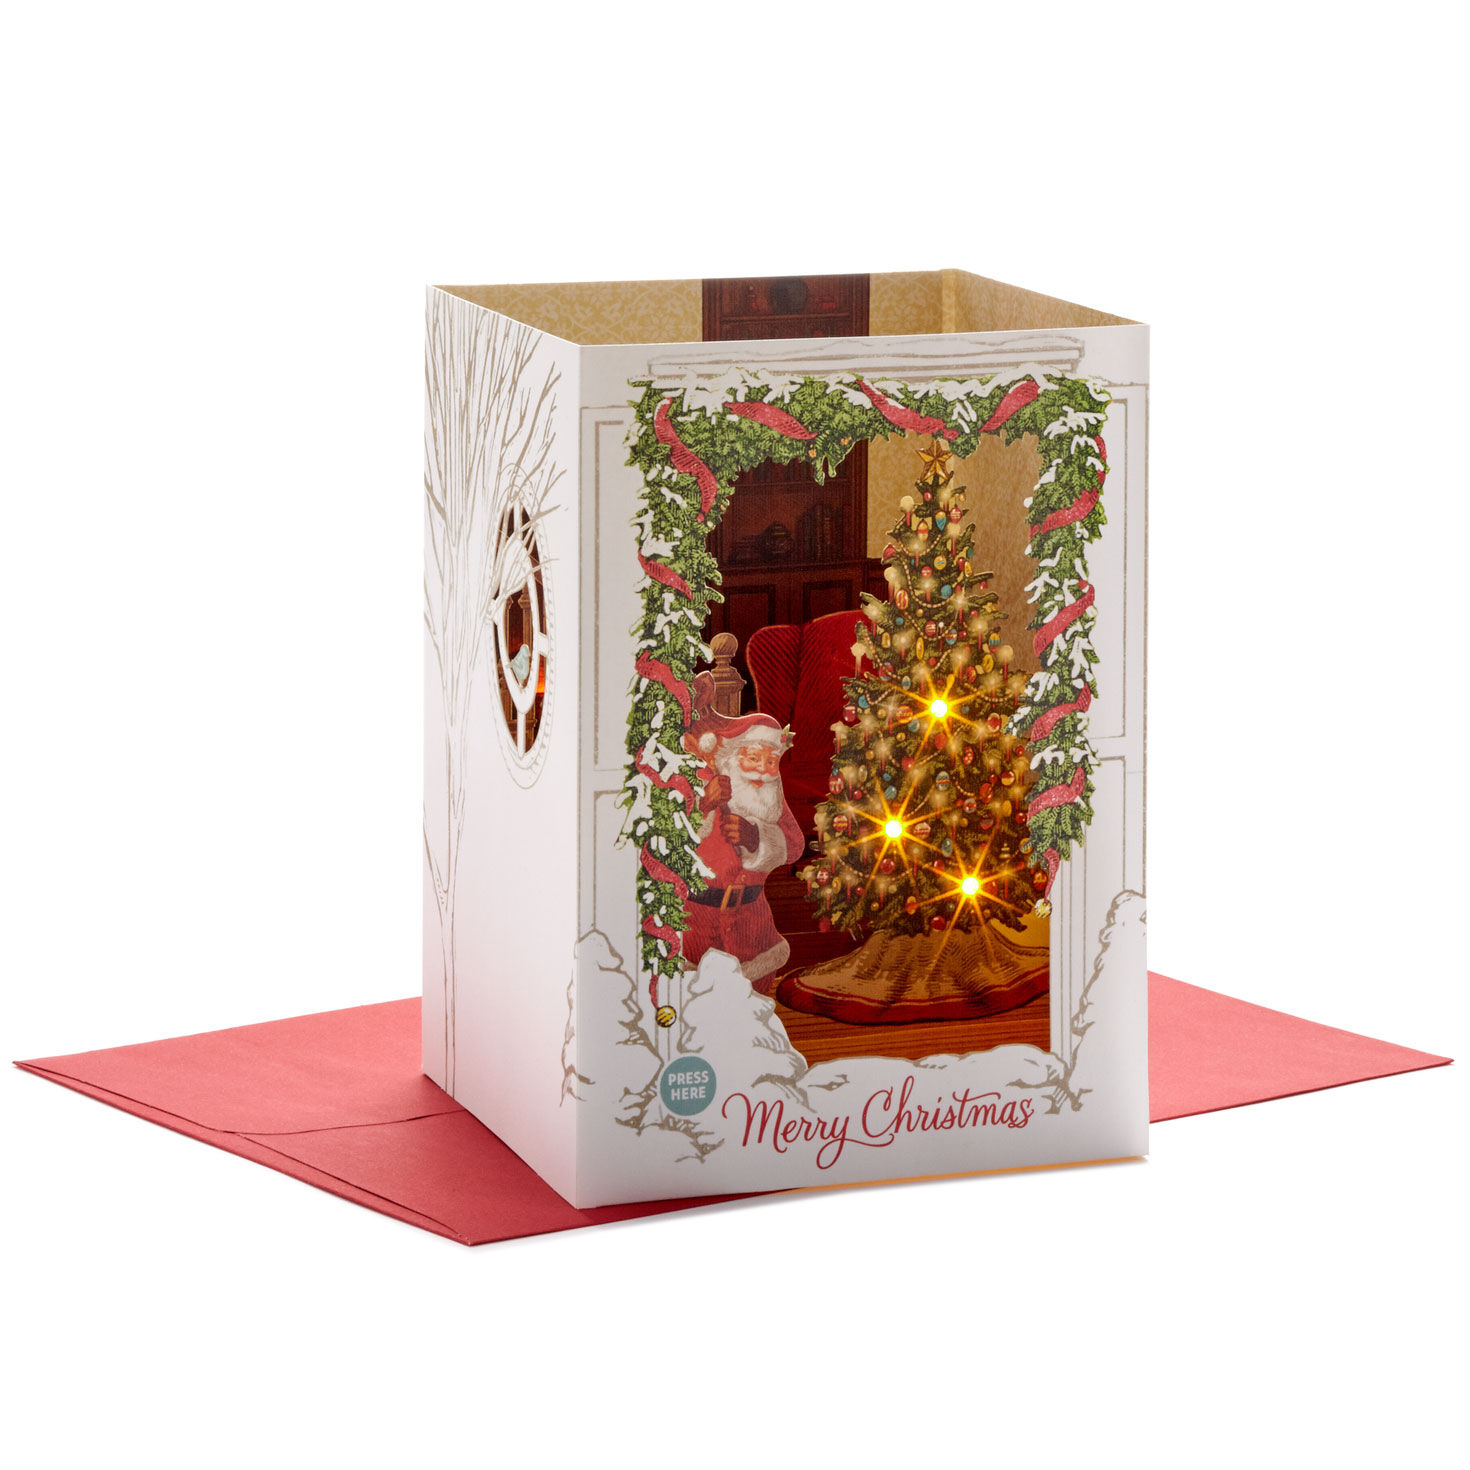 Details about   LEANIN TREE CHRISTMAS CARD SET SANTA & TOYS 10PK NEW BUY IT NOW IN STORE 